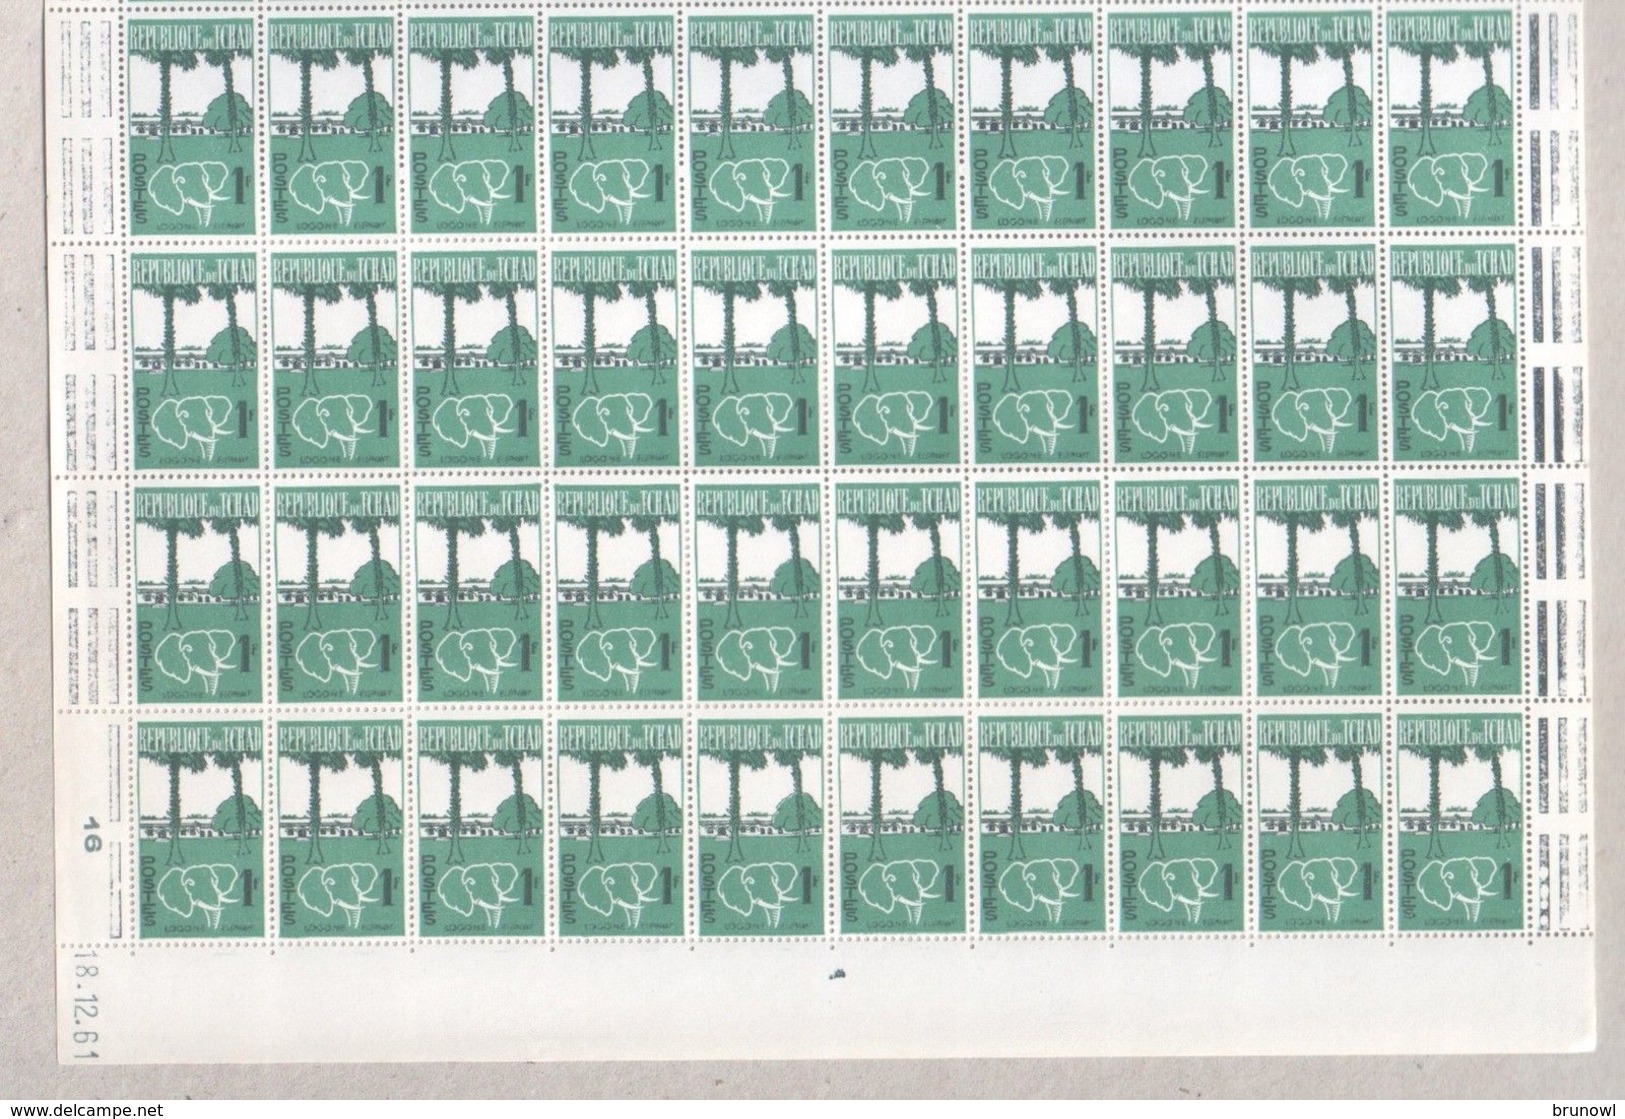 Chad MNH Sheet Of 1962 1F Elephant And Lagoon Stamps - Ciad (1960-...)